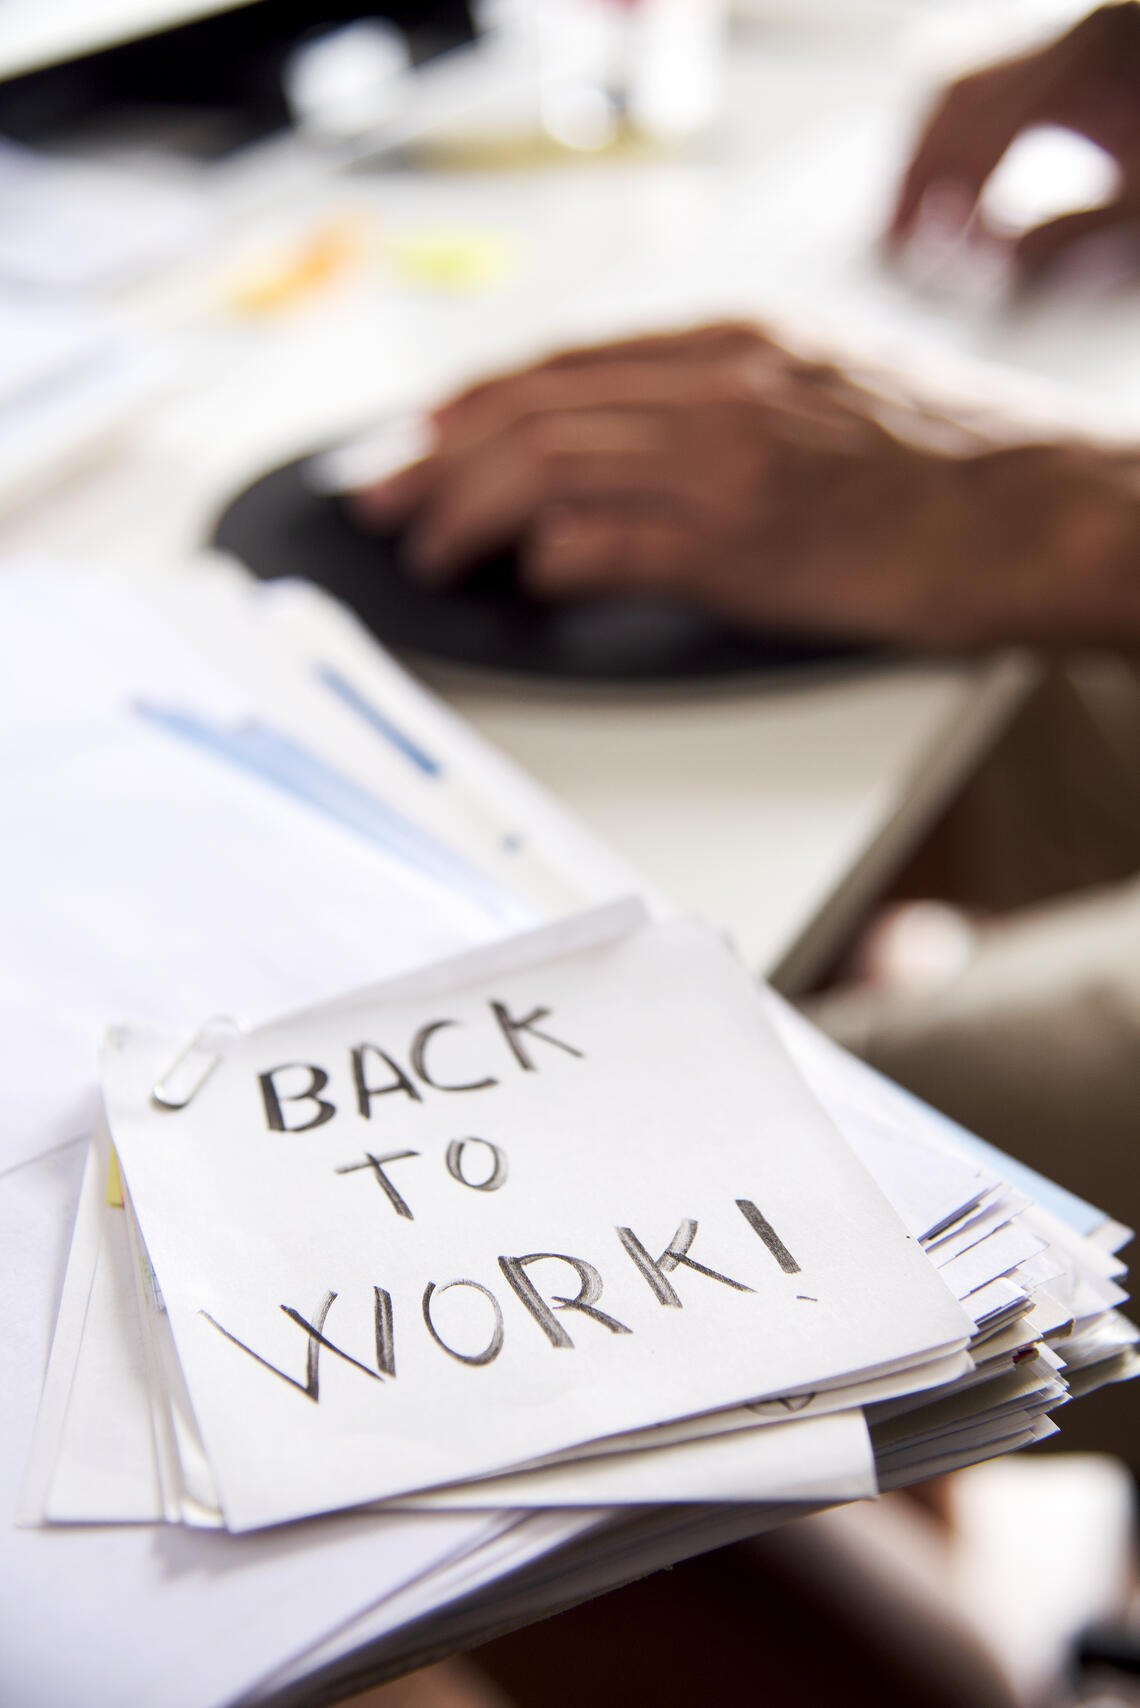 A photo of a note on a desk that reads "Back to Work!" 